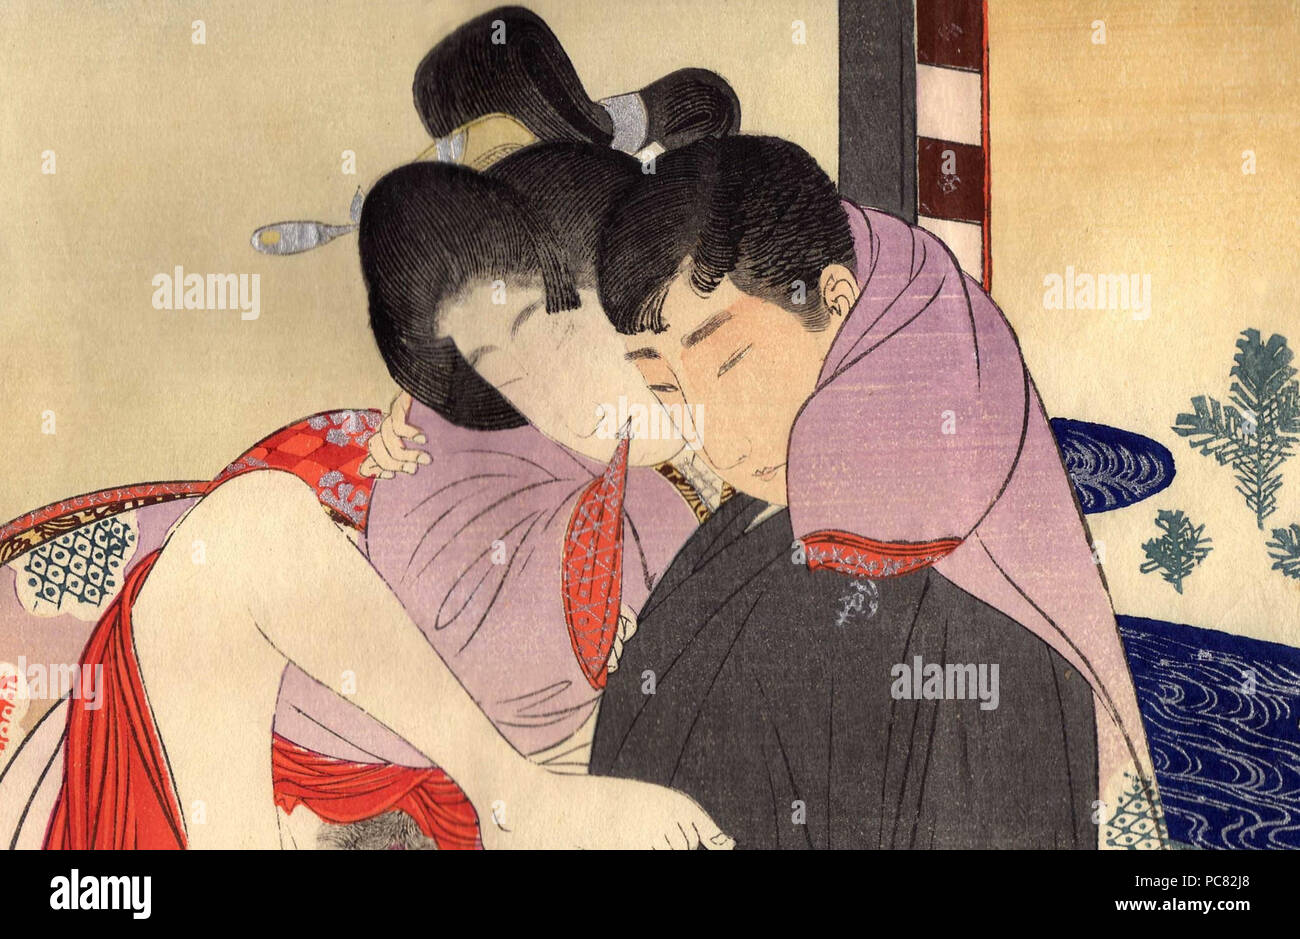 Japanese Girls Kissing And Grinding